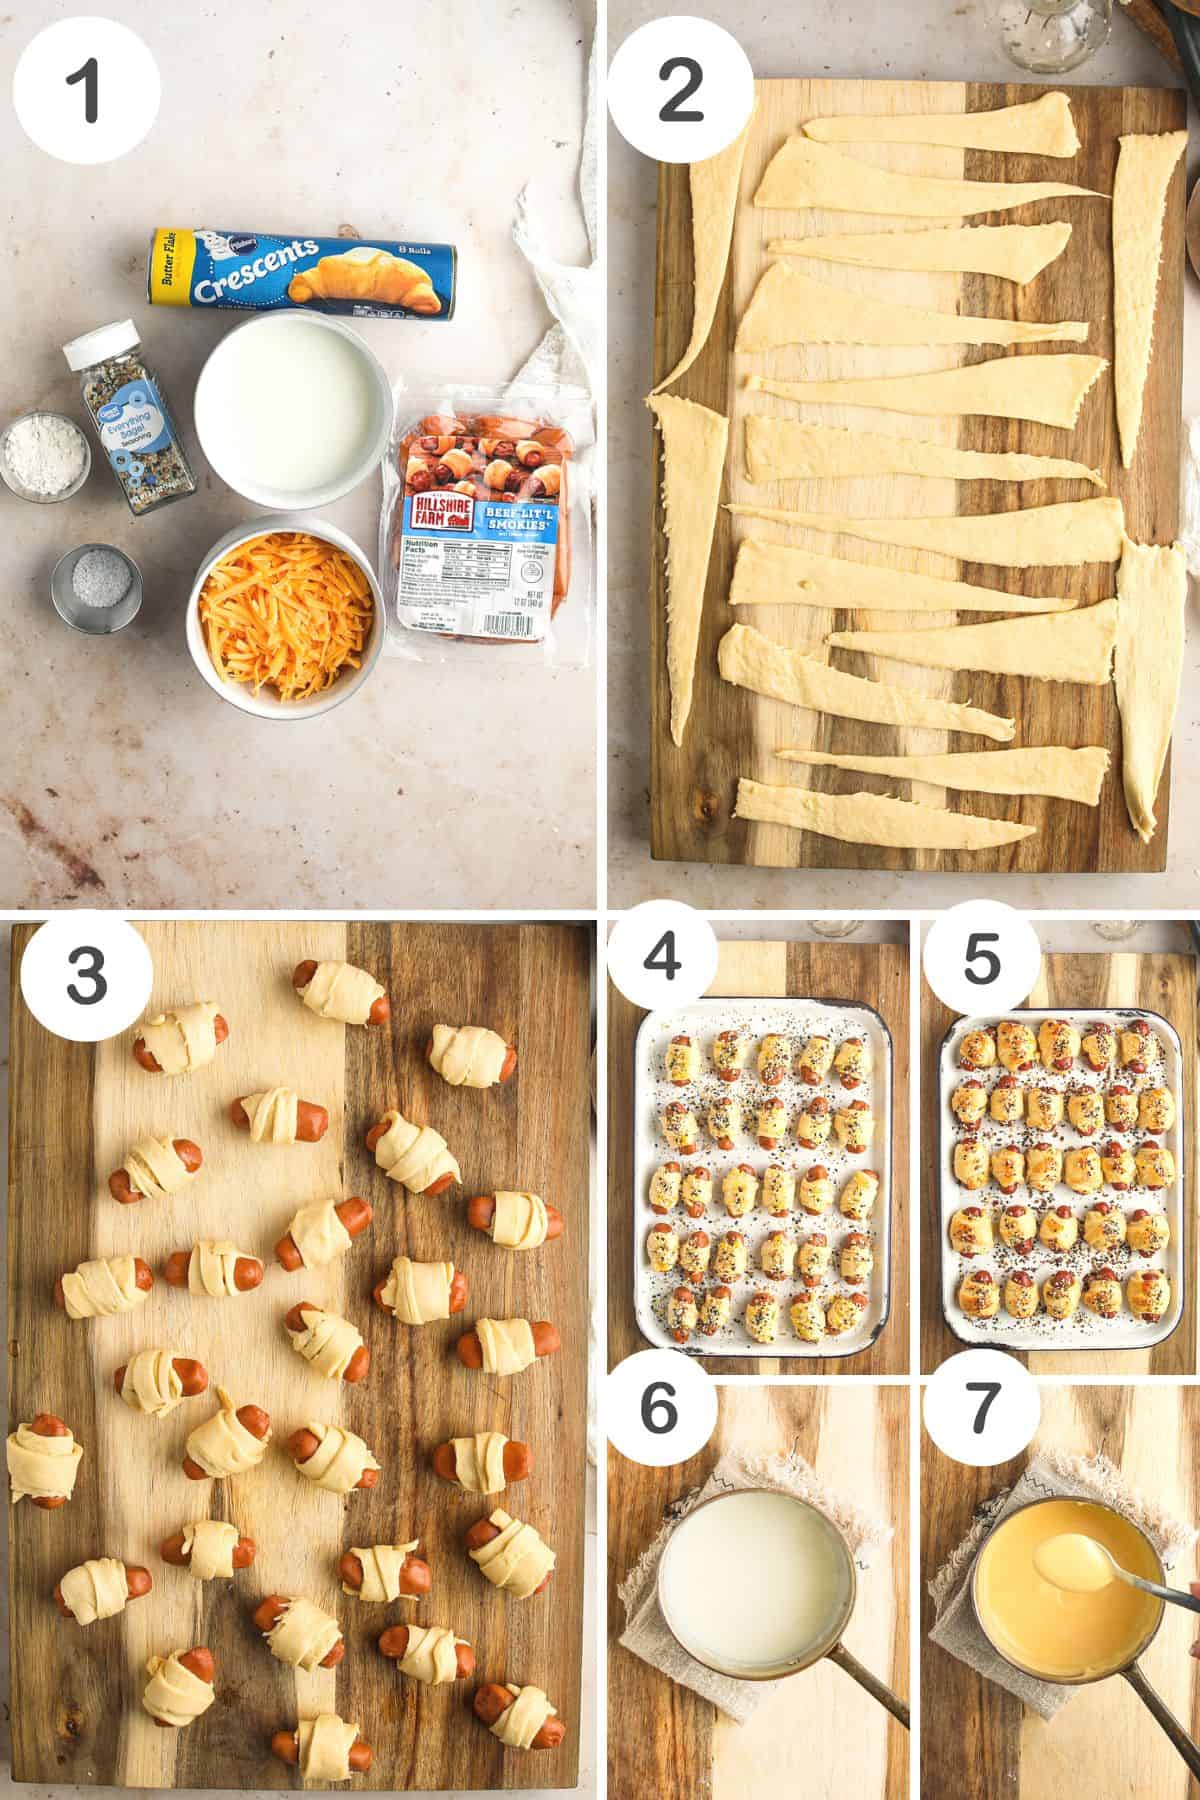 Step by step photos for the Seasoned Pigs In a Blanket